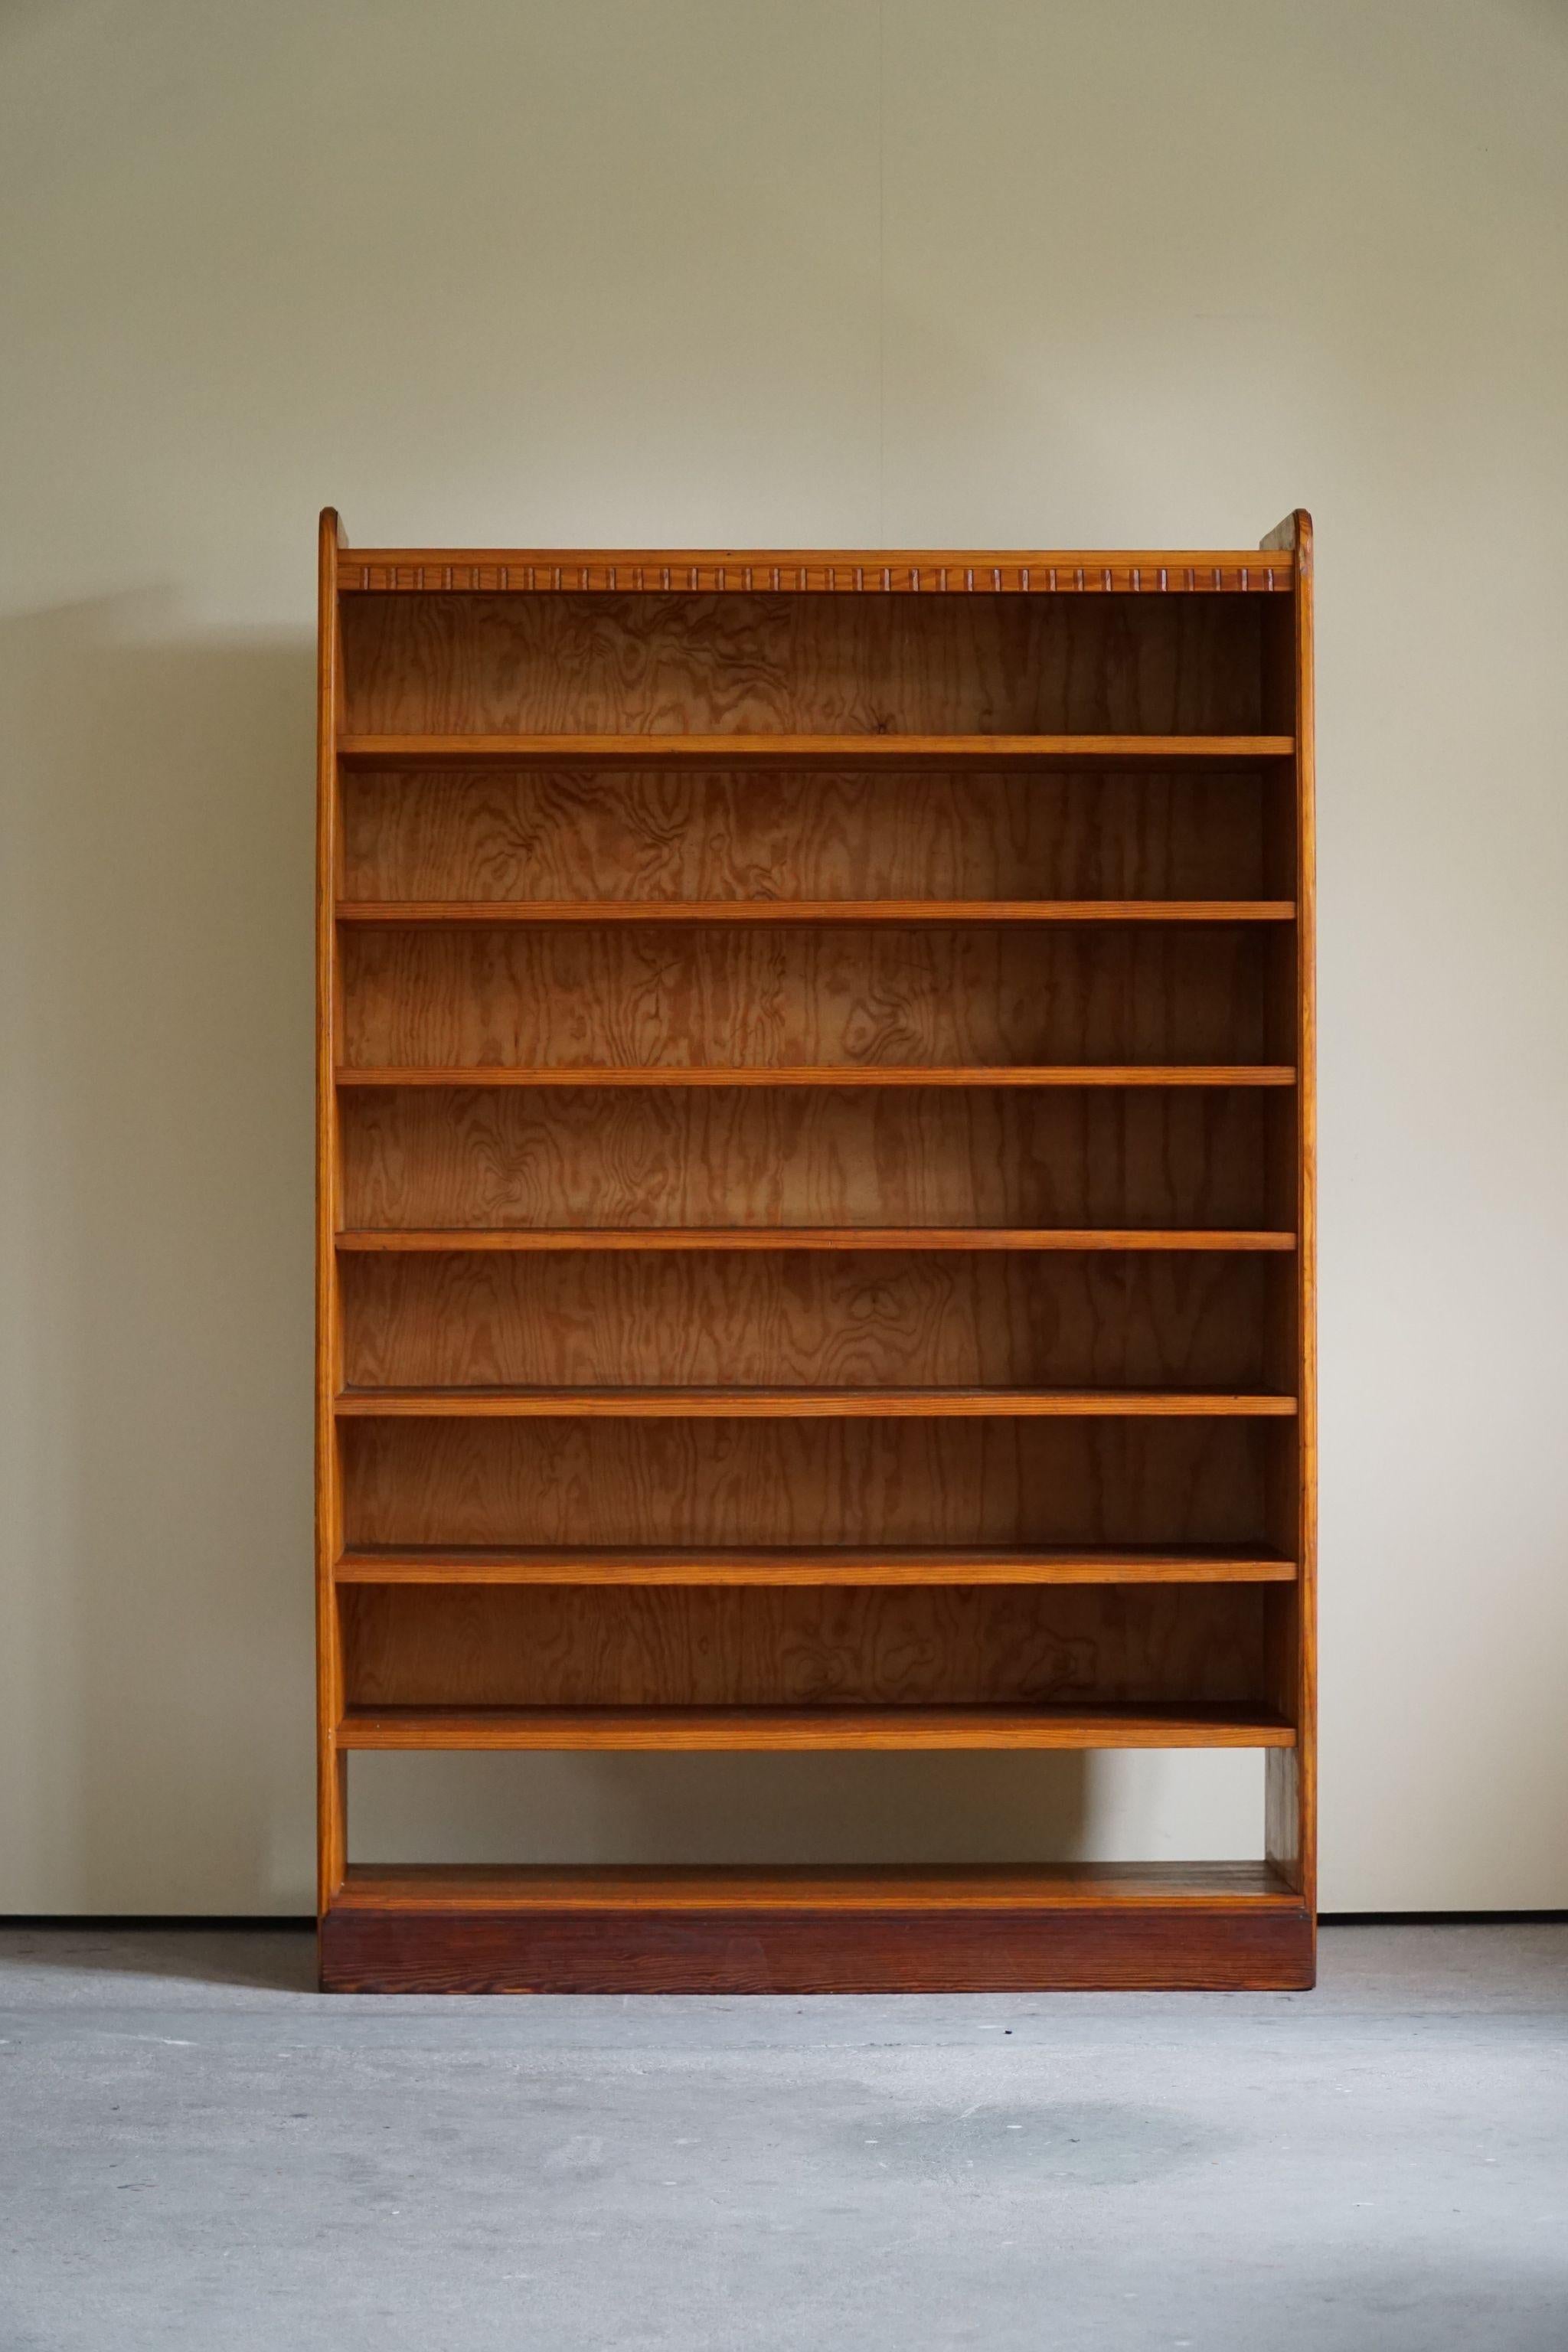 Martin Nyrop Bookcase by Rud, Rasmussen in Oregon Pine, Danish Modern, 1905 In Good Condition For Sale In Odense, DK